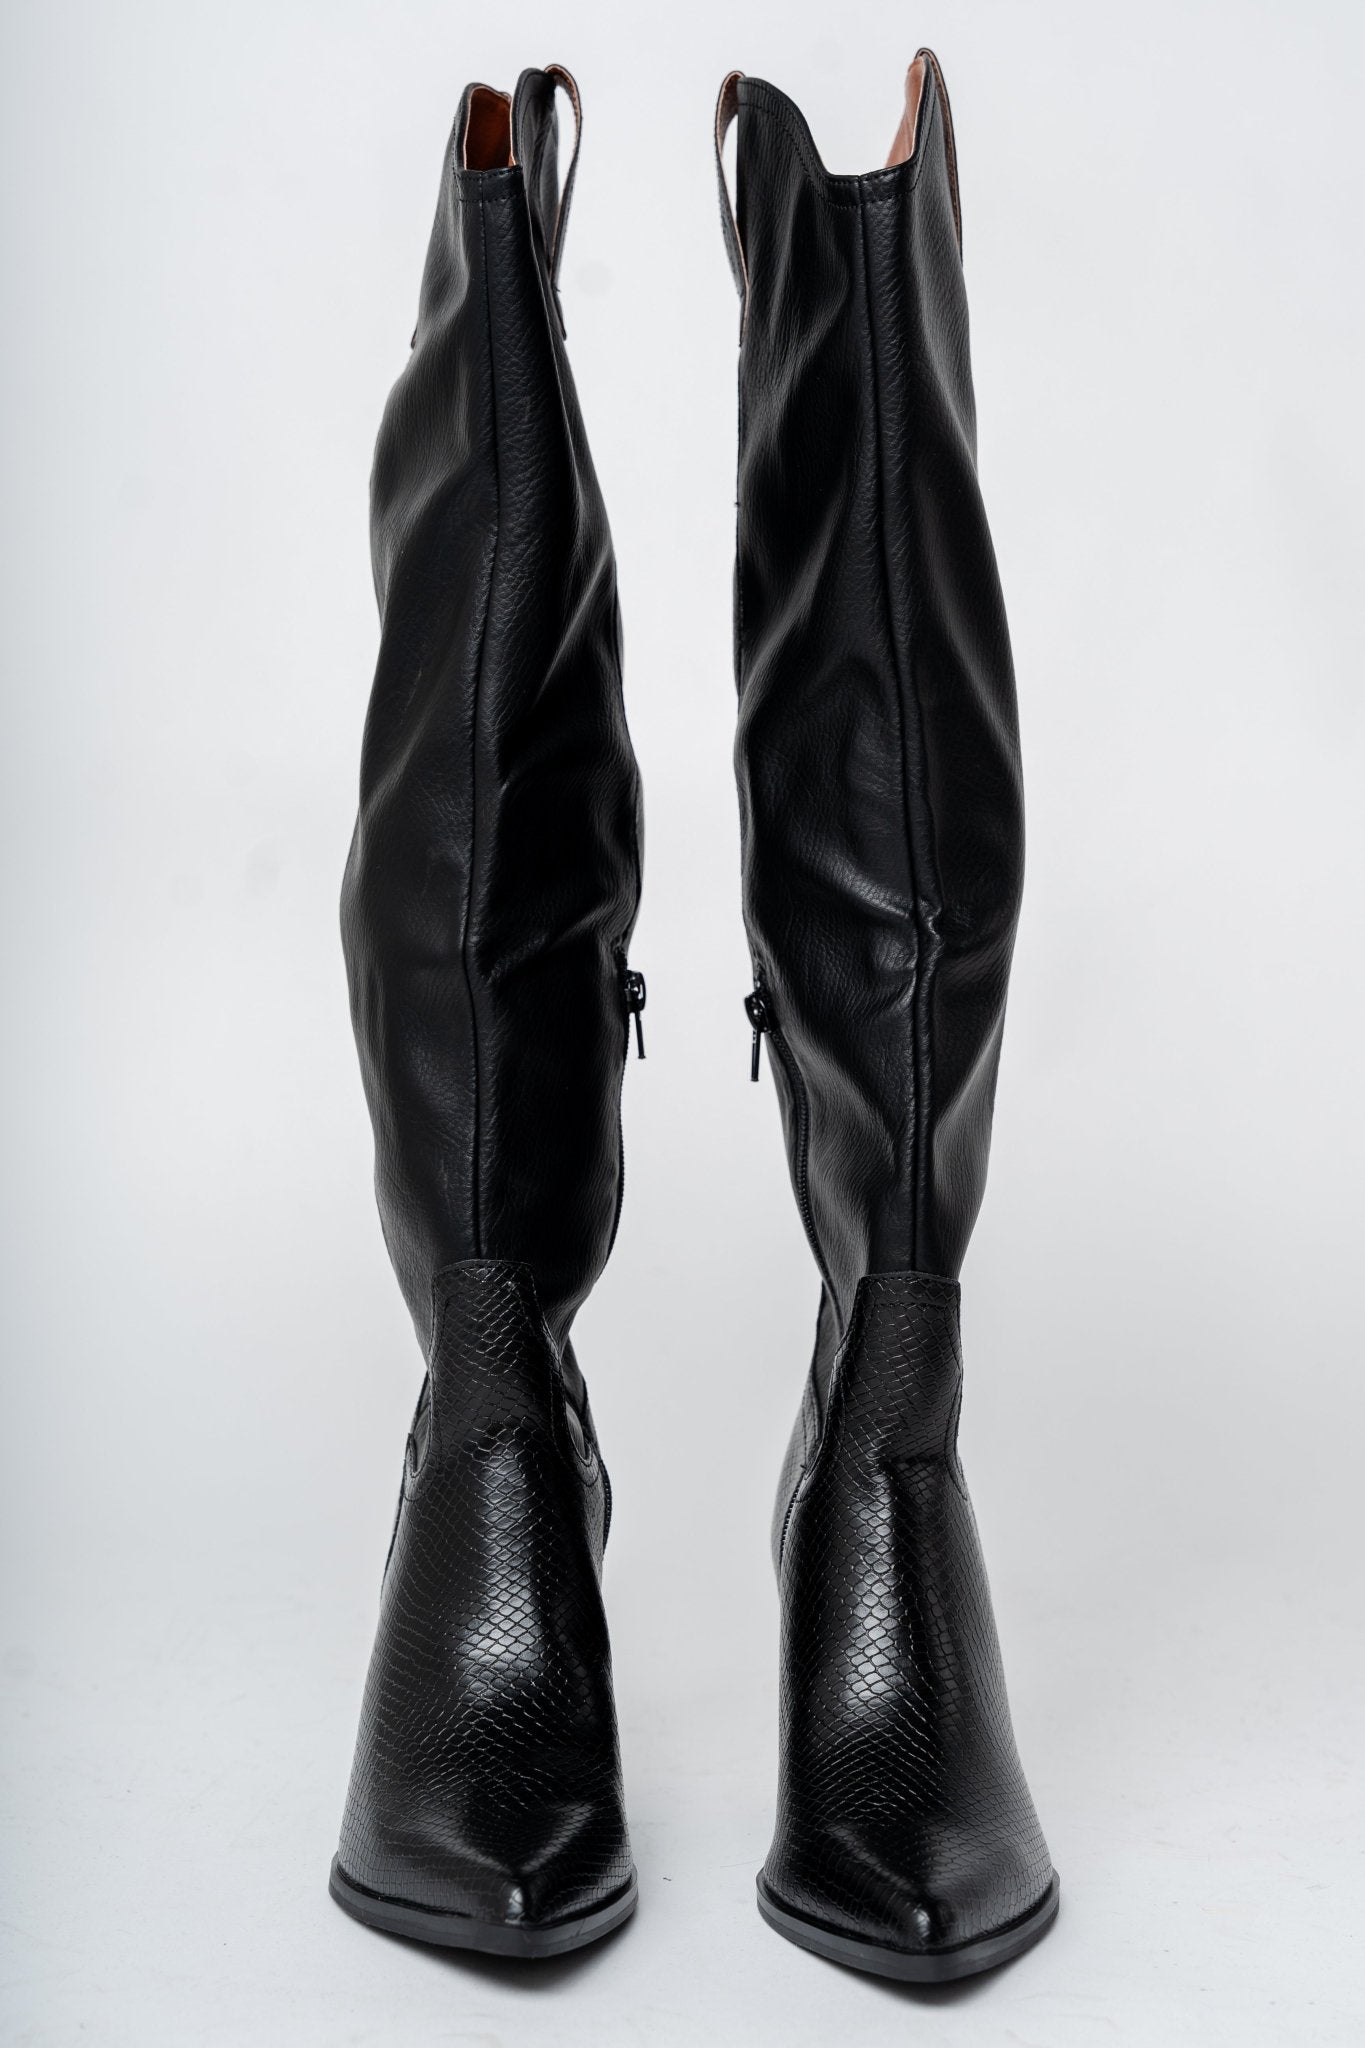 Barcelona western boot black - Trendy shoes - Fashion Shoes at Lush Fashion Lounge Boutique in Oklahoma City